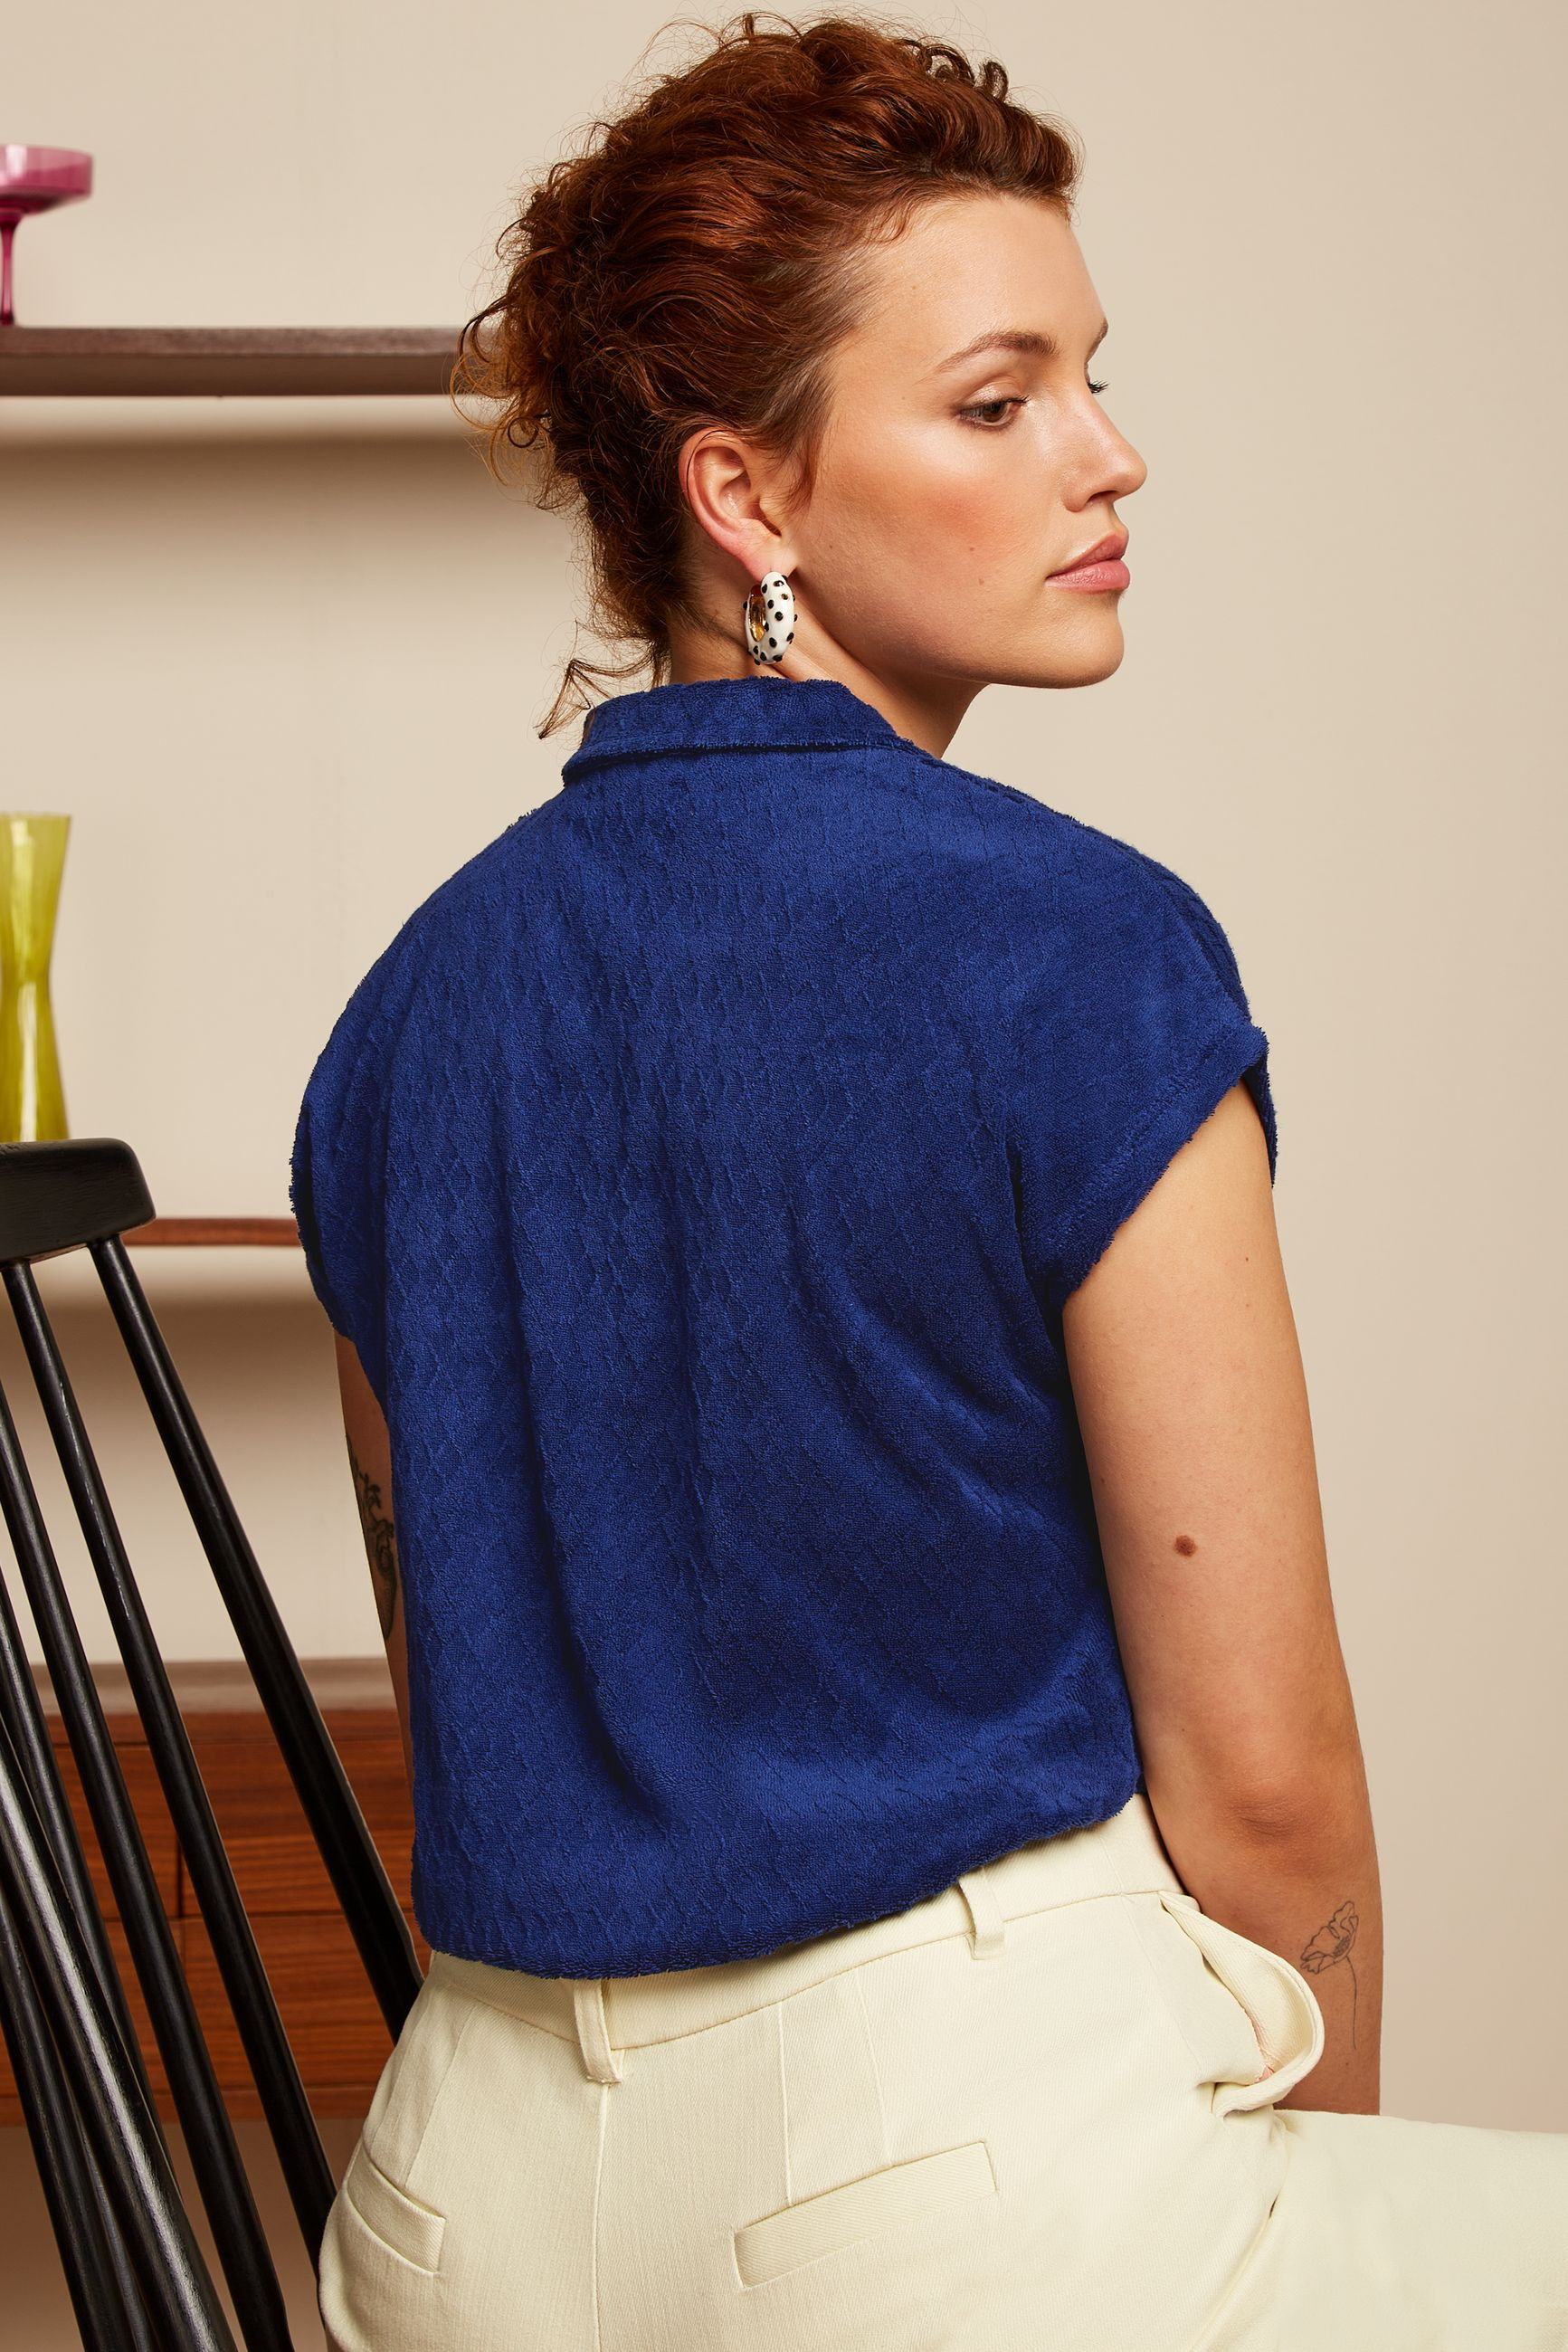 KING LOUIE DANI BLOUSE WILMA TERRY, FARBE: DAZZLING BLUE, BLUSE